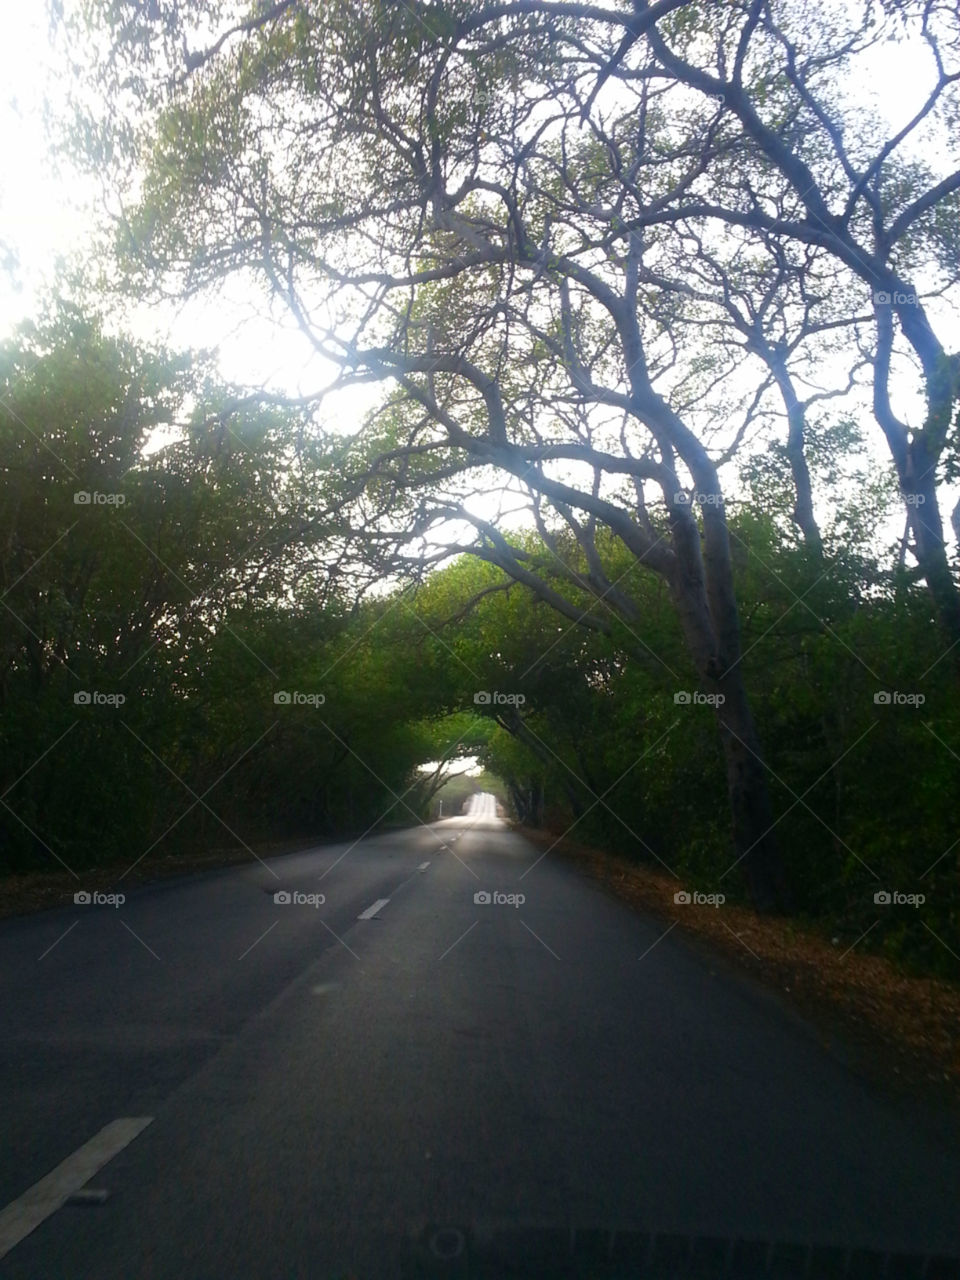 Cruising thru Tree Caves . Driving thru Tunnels of Trees in Curacao